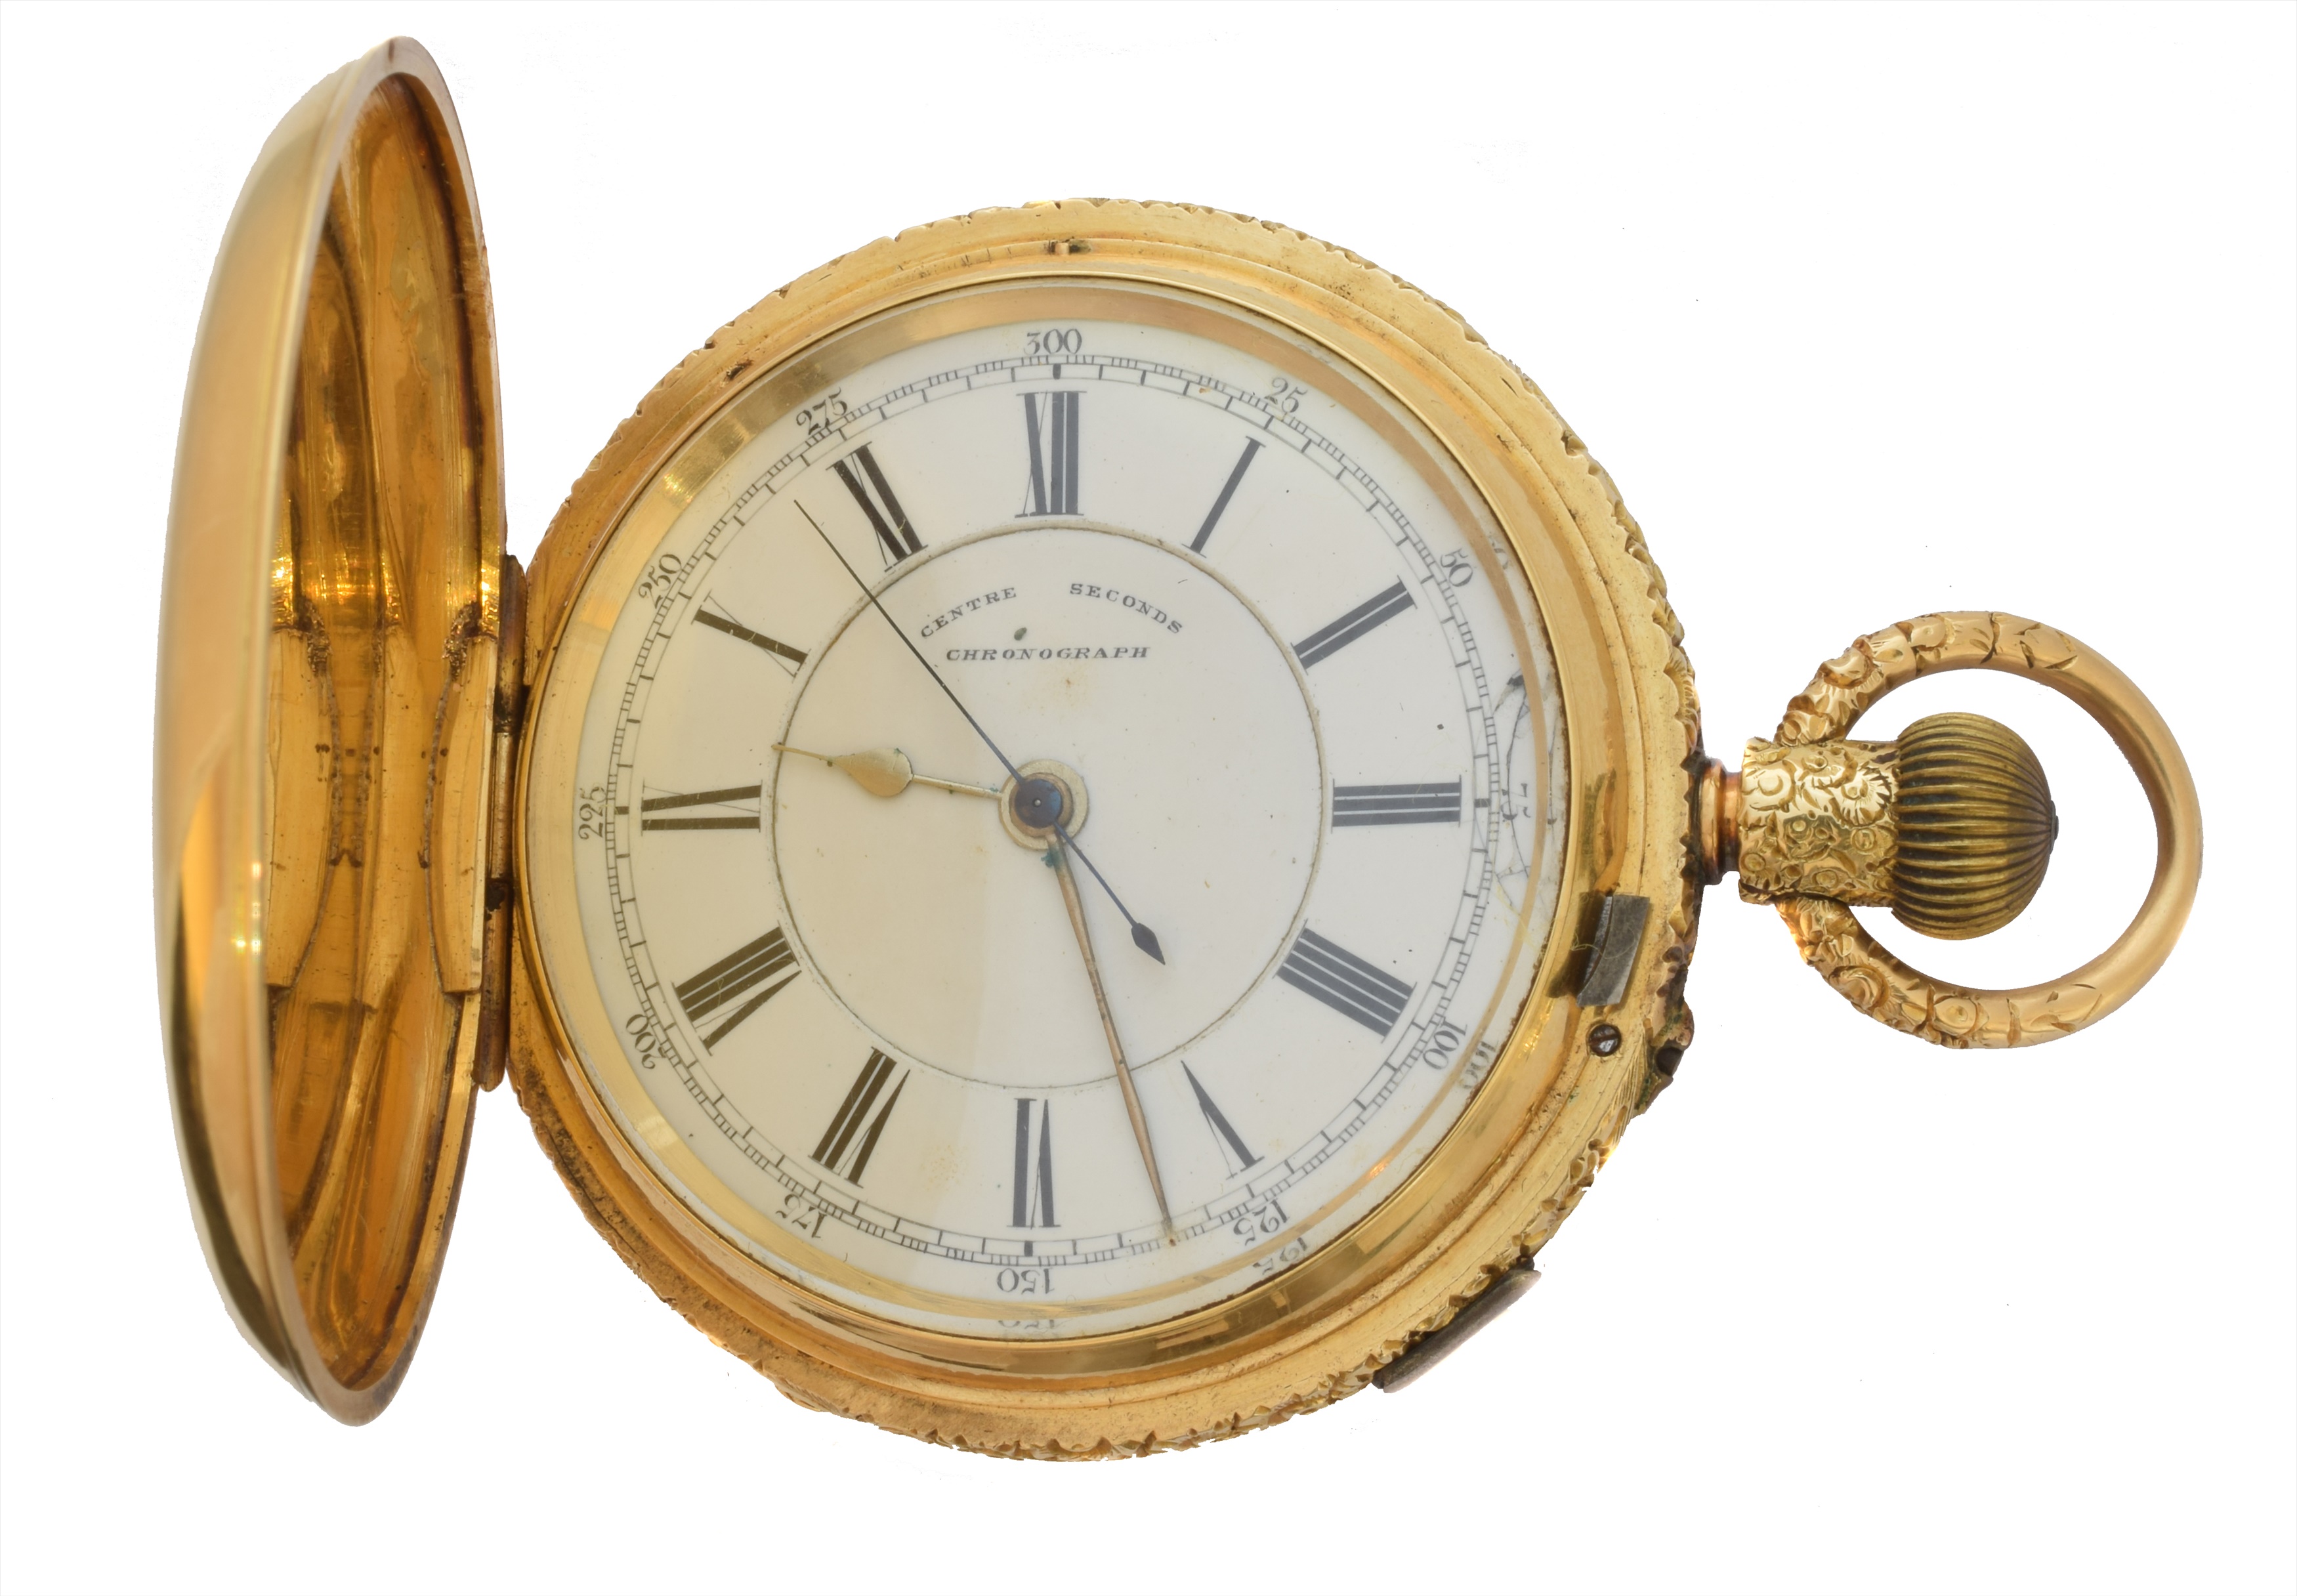 A Victorian 18ct gold full hunter pocket watch by John Hawley & Son Ltd., the 18ct gold case with foliate surround and bow, opening to reveal a circular white enamel dial signed 'Centre Seconds Chronograph,' Roman numeral hour markers and Arabic outer minutes track, keyless movement signed and numbered John Hawley & Son Ltd., 77381, case with hallmarks for John Helsby, Chester, 1897, case diameter 57mm, gross weight 170.4g.